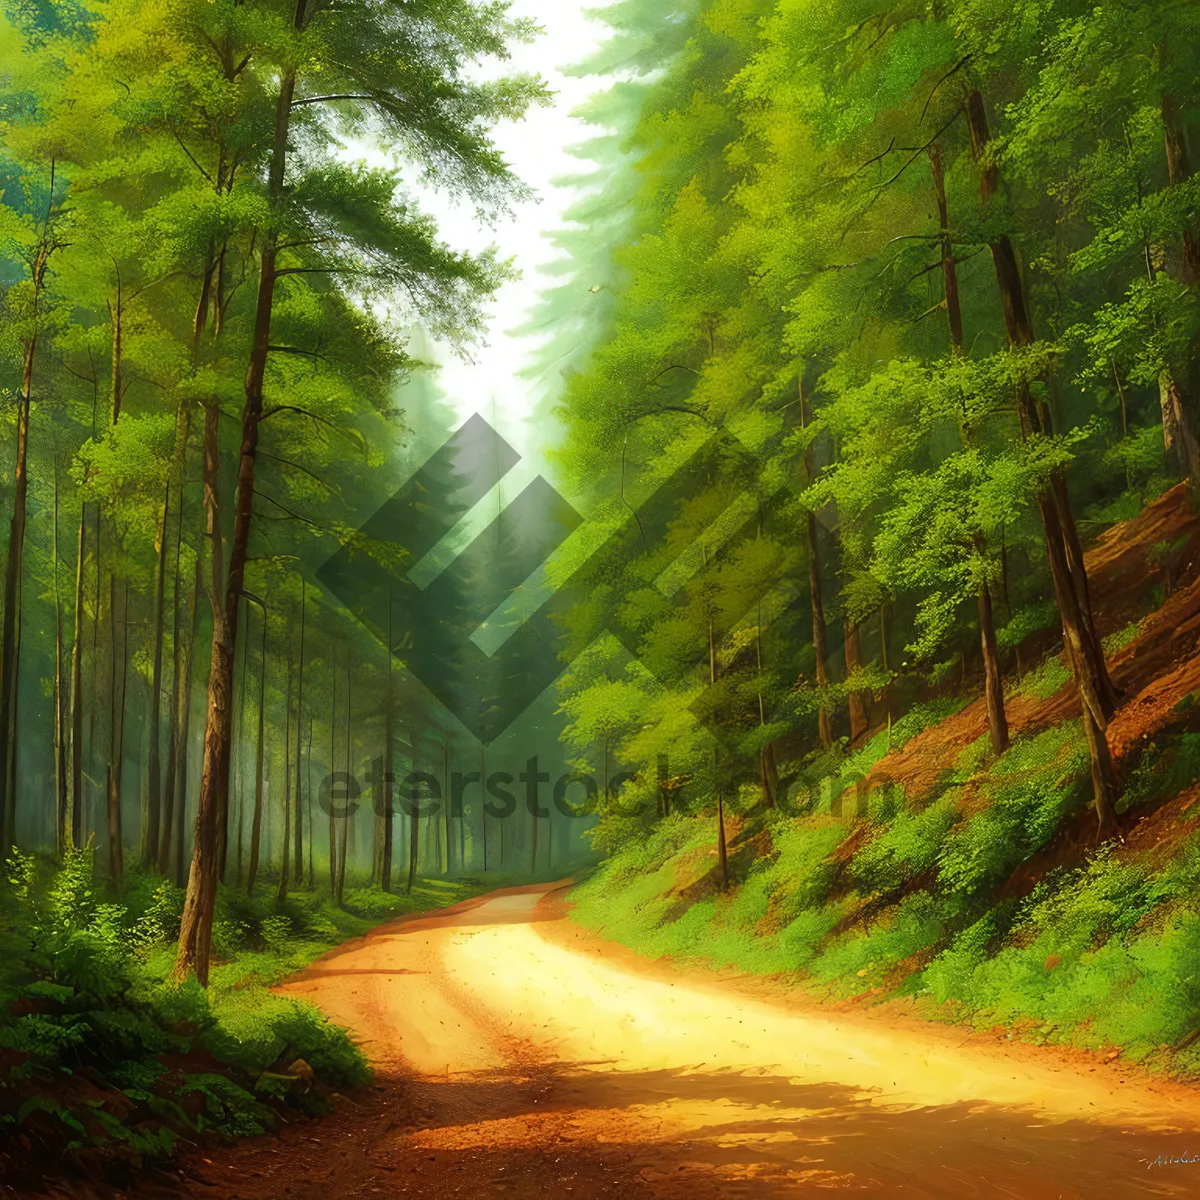 Picture of Enchanting Woods: A picturesque scene of nature's beauty in the forest